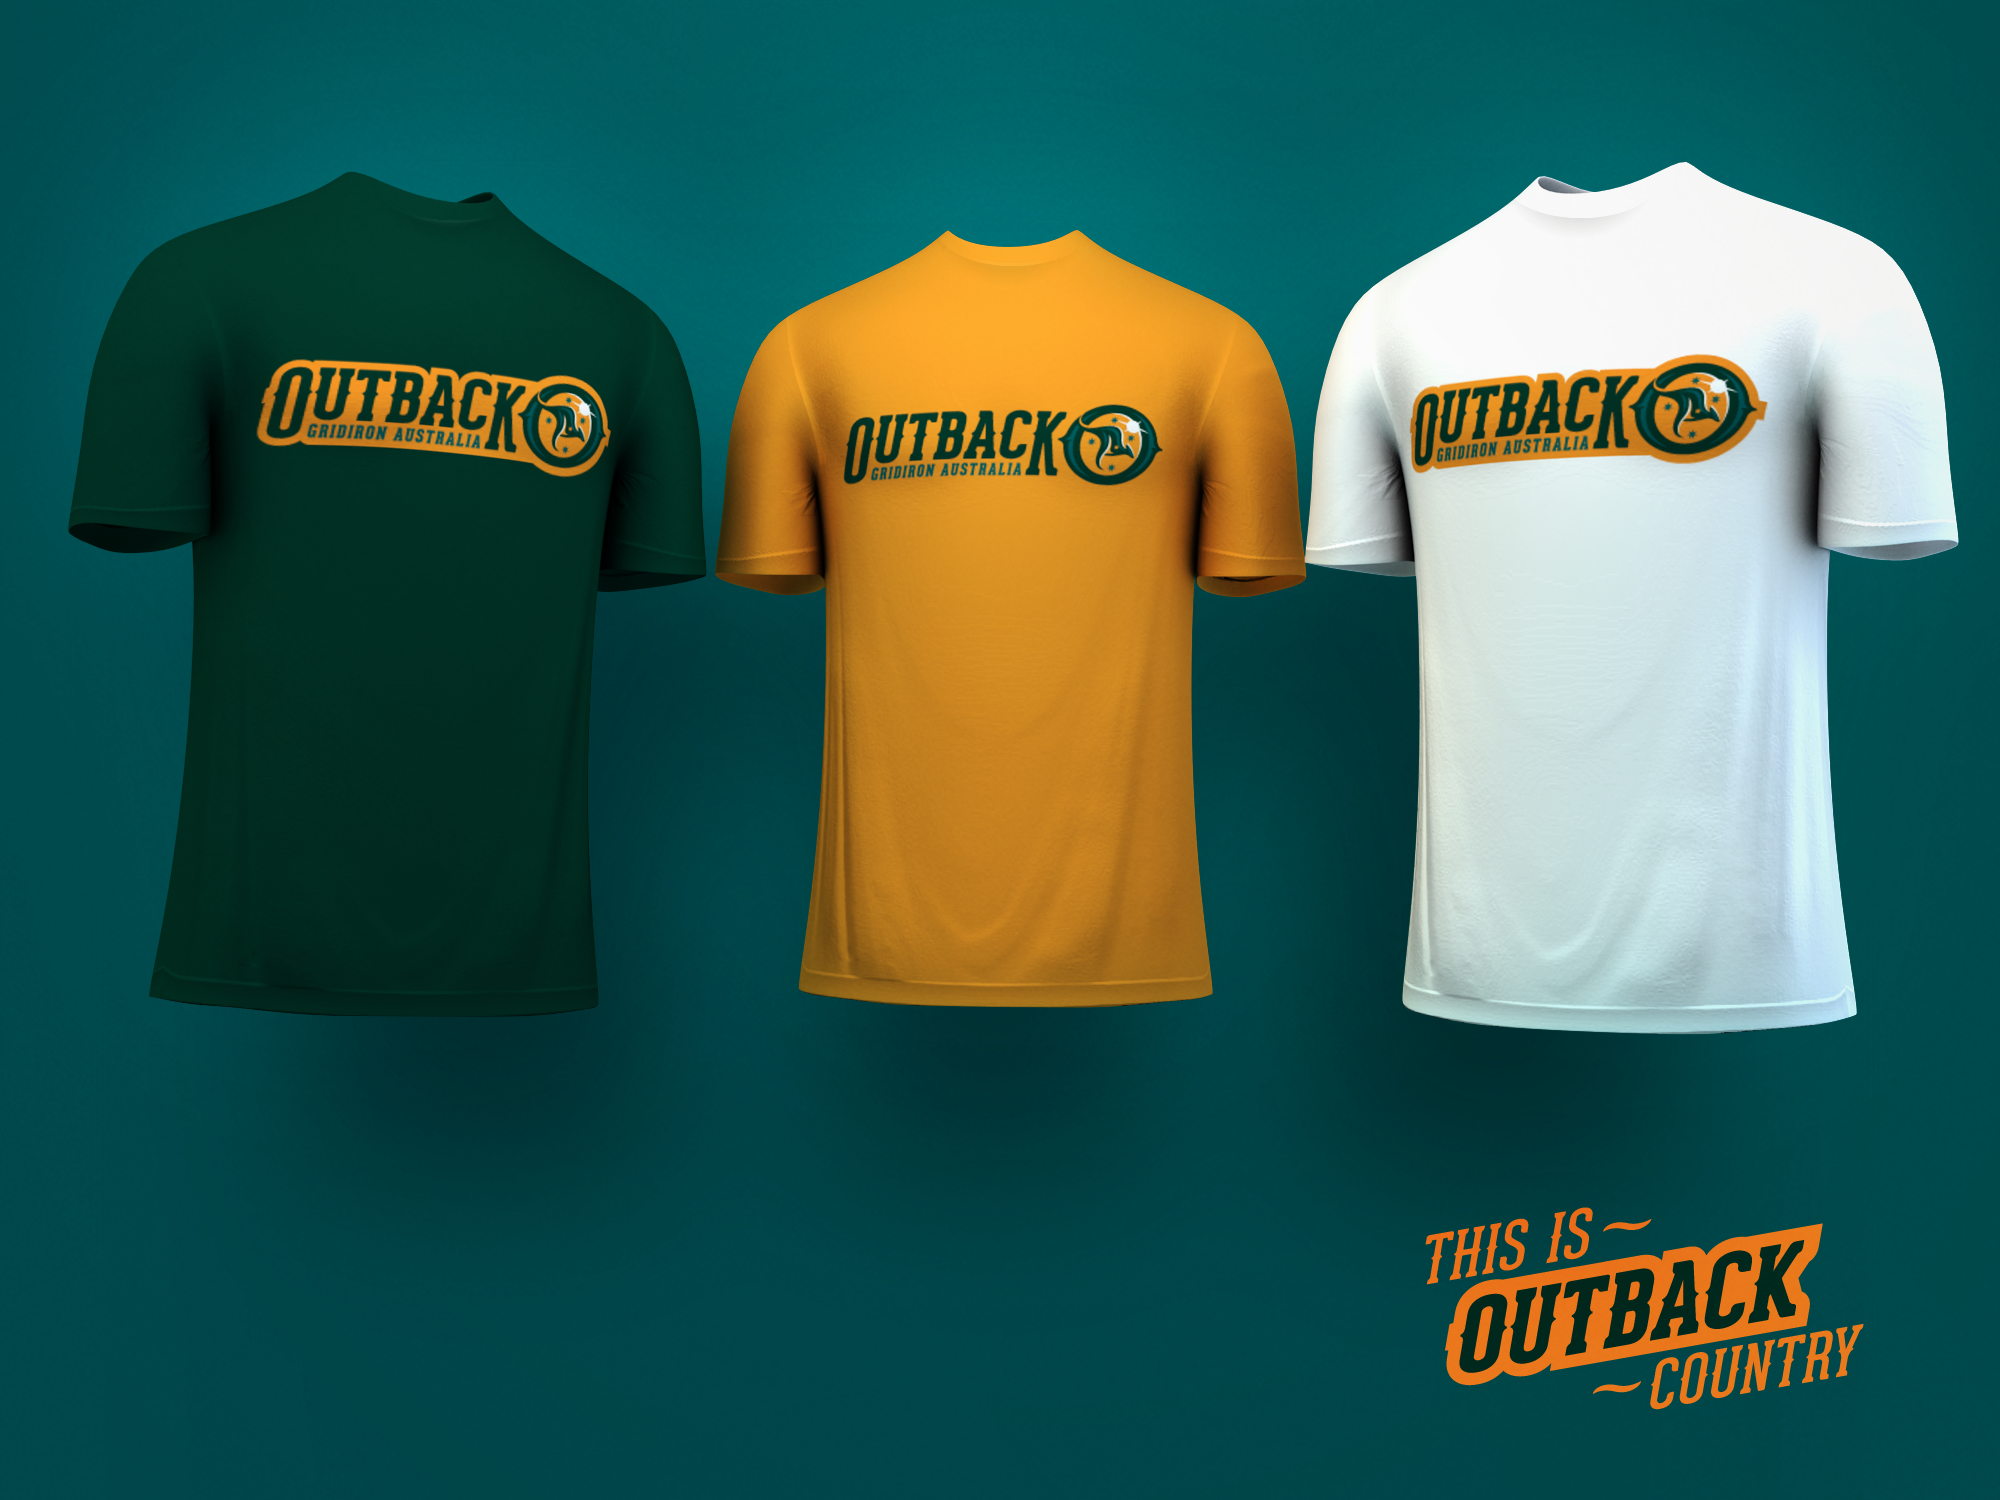 Outback T Shirts by Fraser Davidson on Dribbble